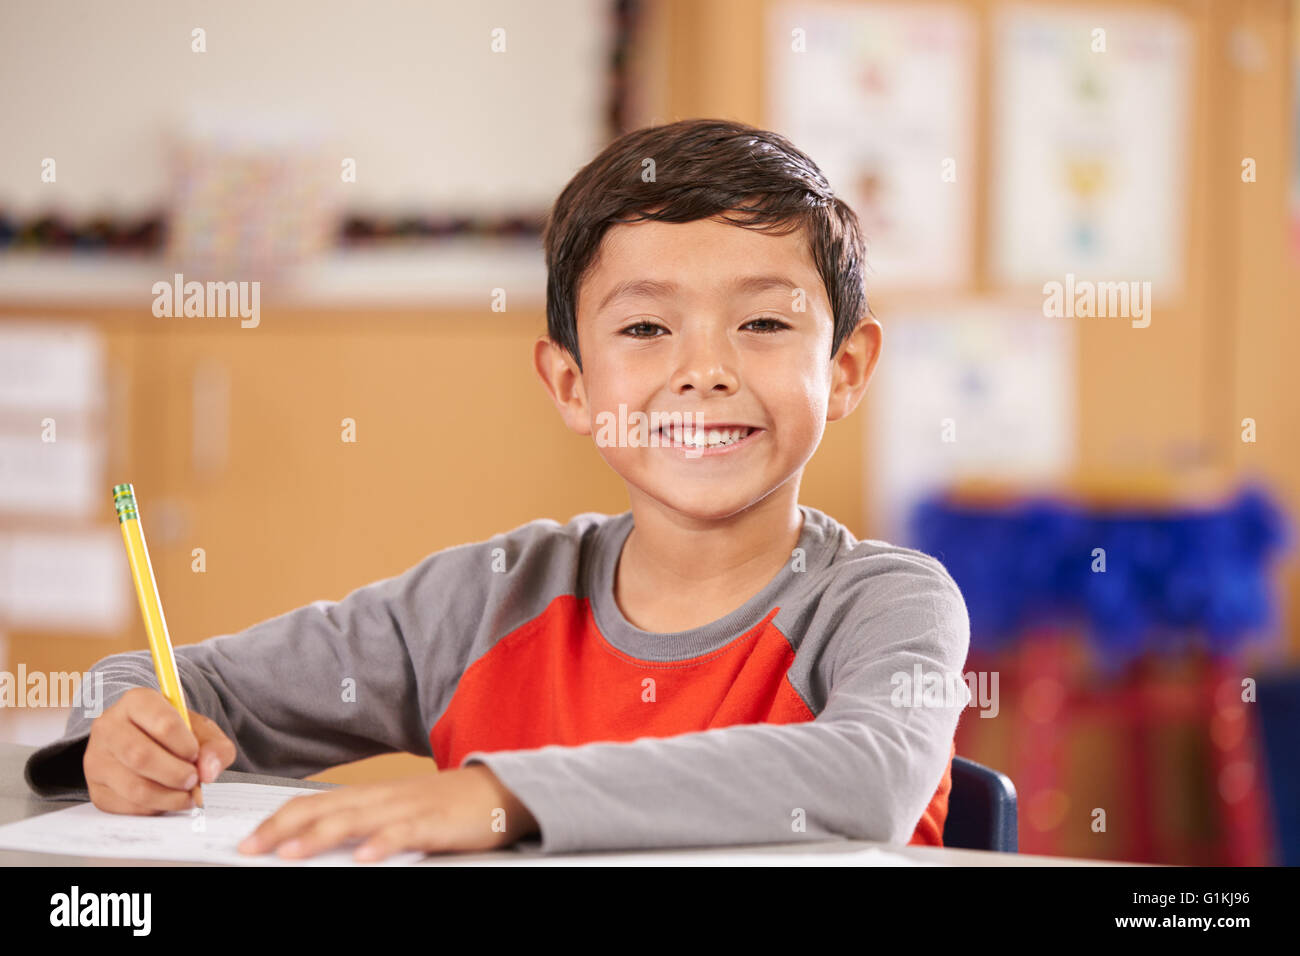 Portrait of a boy at elementary school sitting in classroom Stock Photo